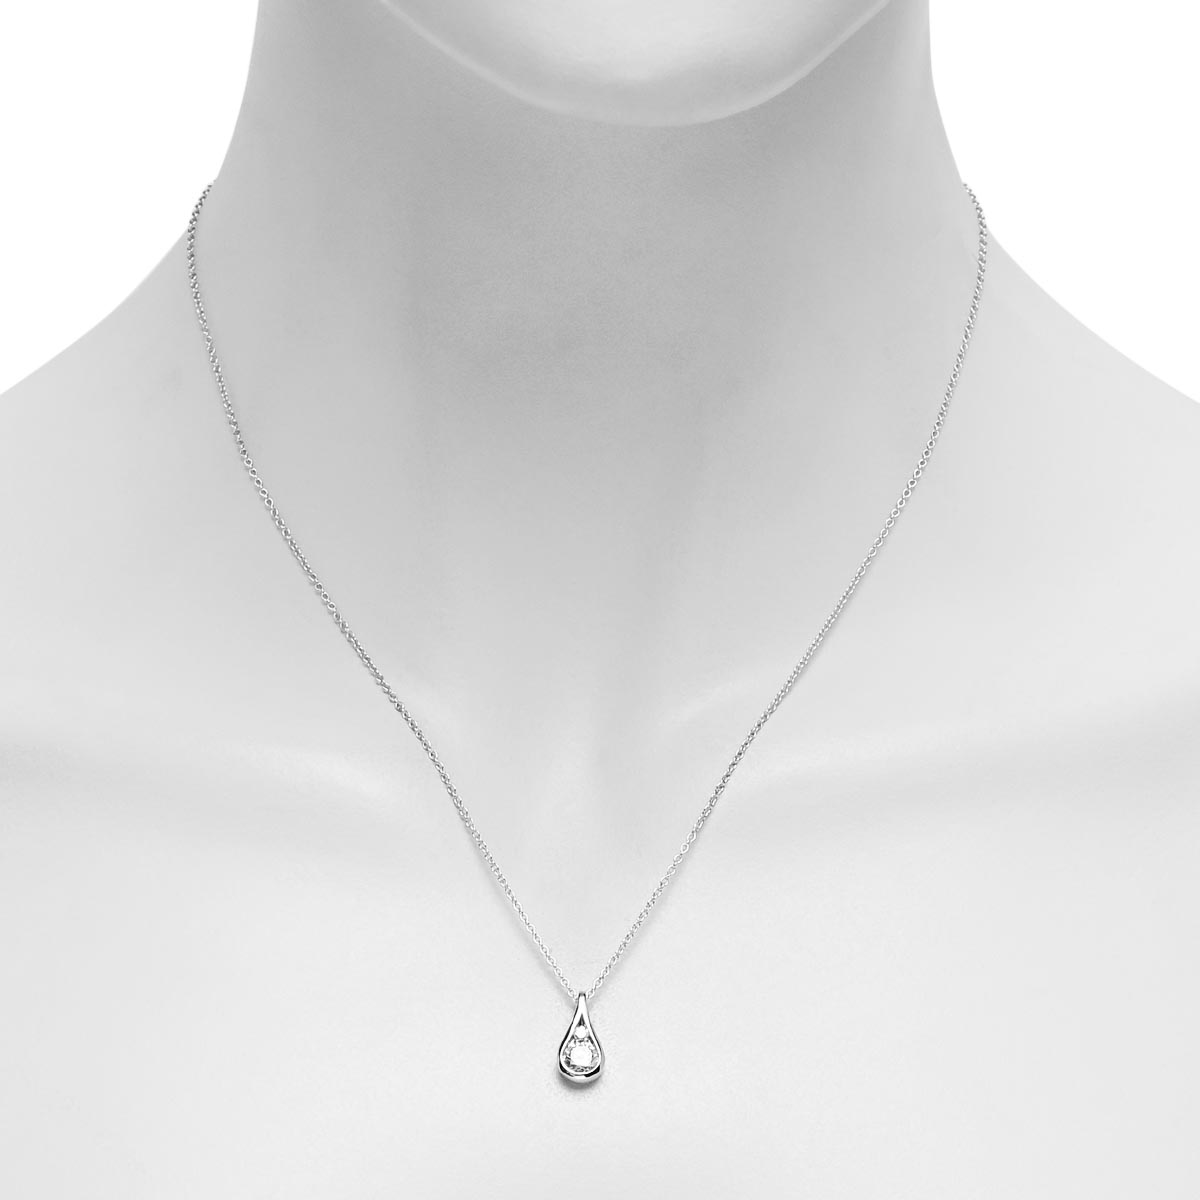 Diamond Drop Necklace in 14kt White Gold (1/2ct tw)